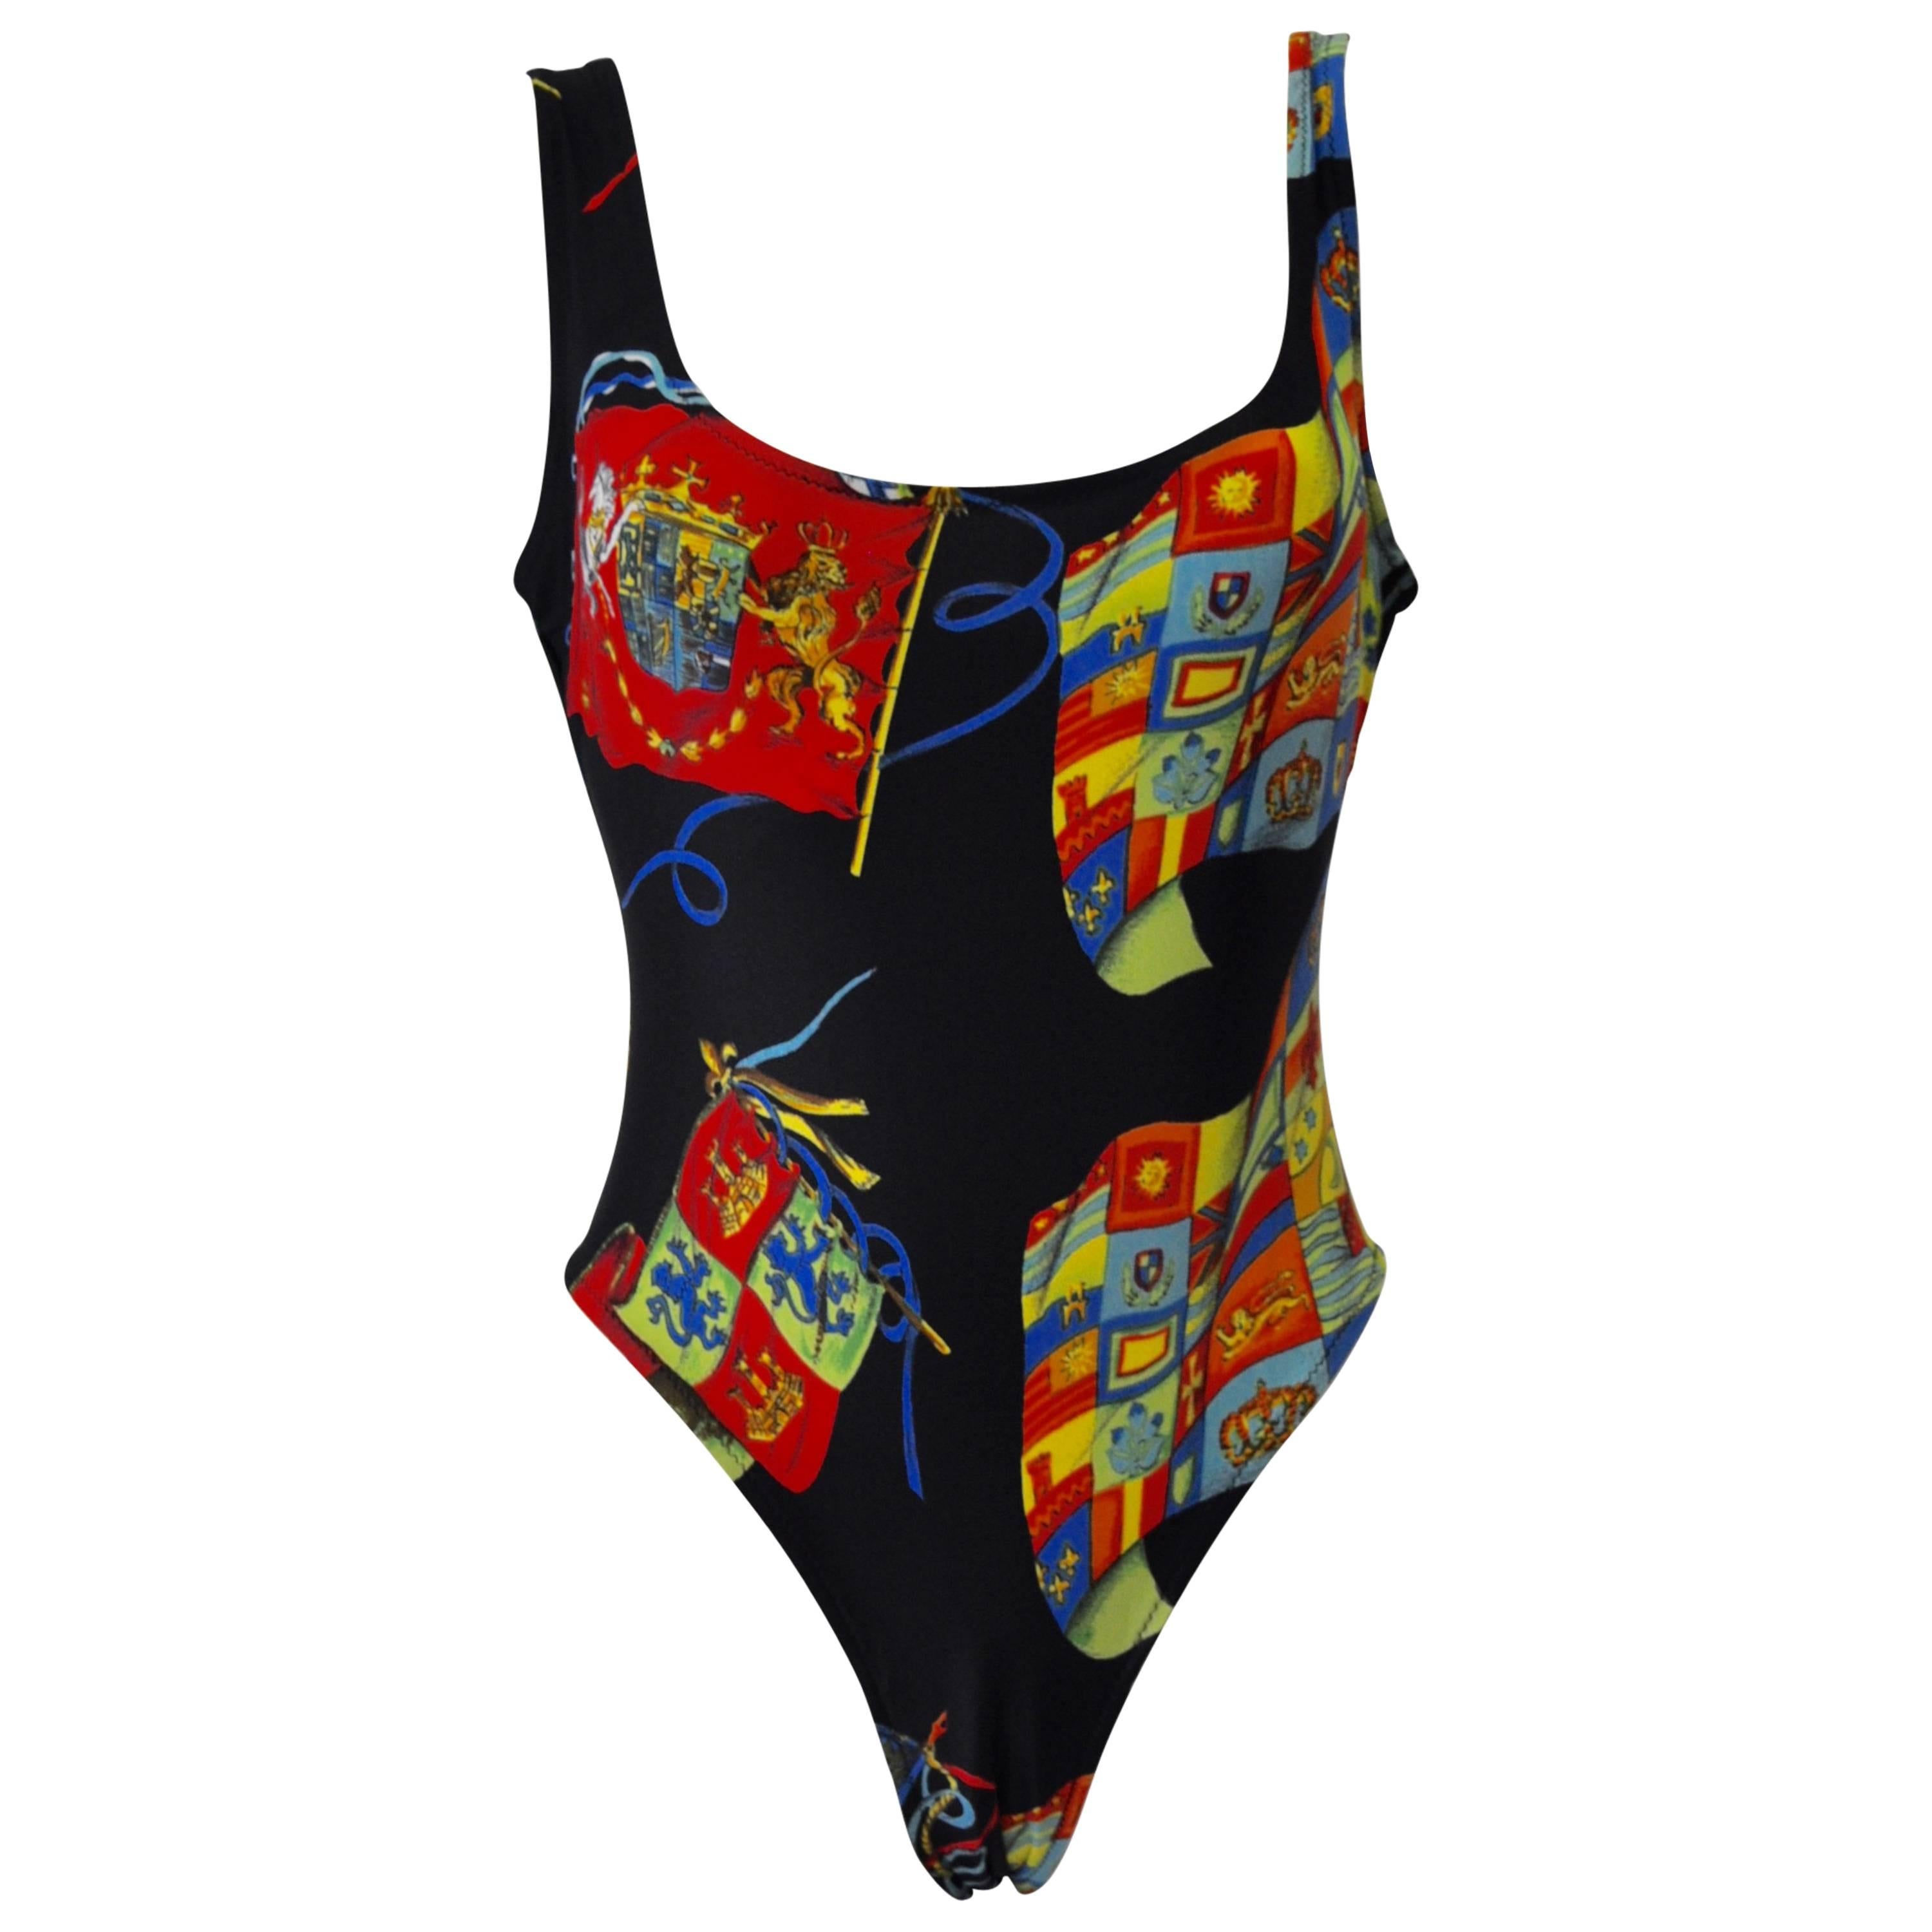 Gianni Versace Istante Coat of Arms Swimsuit For Sale